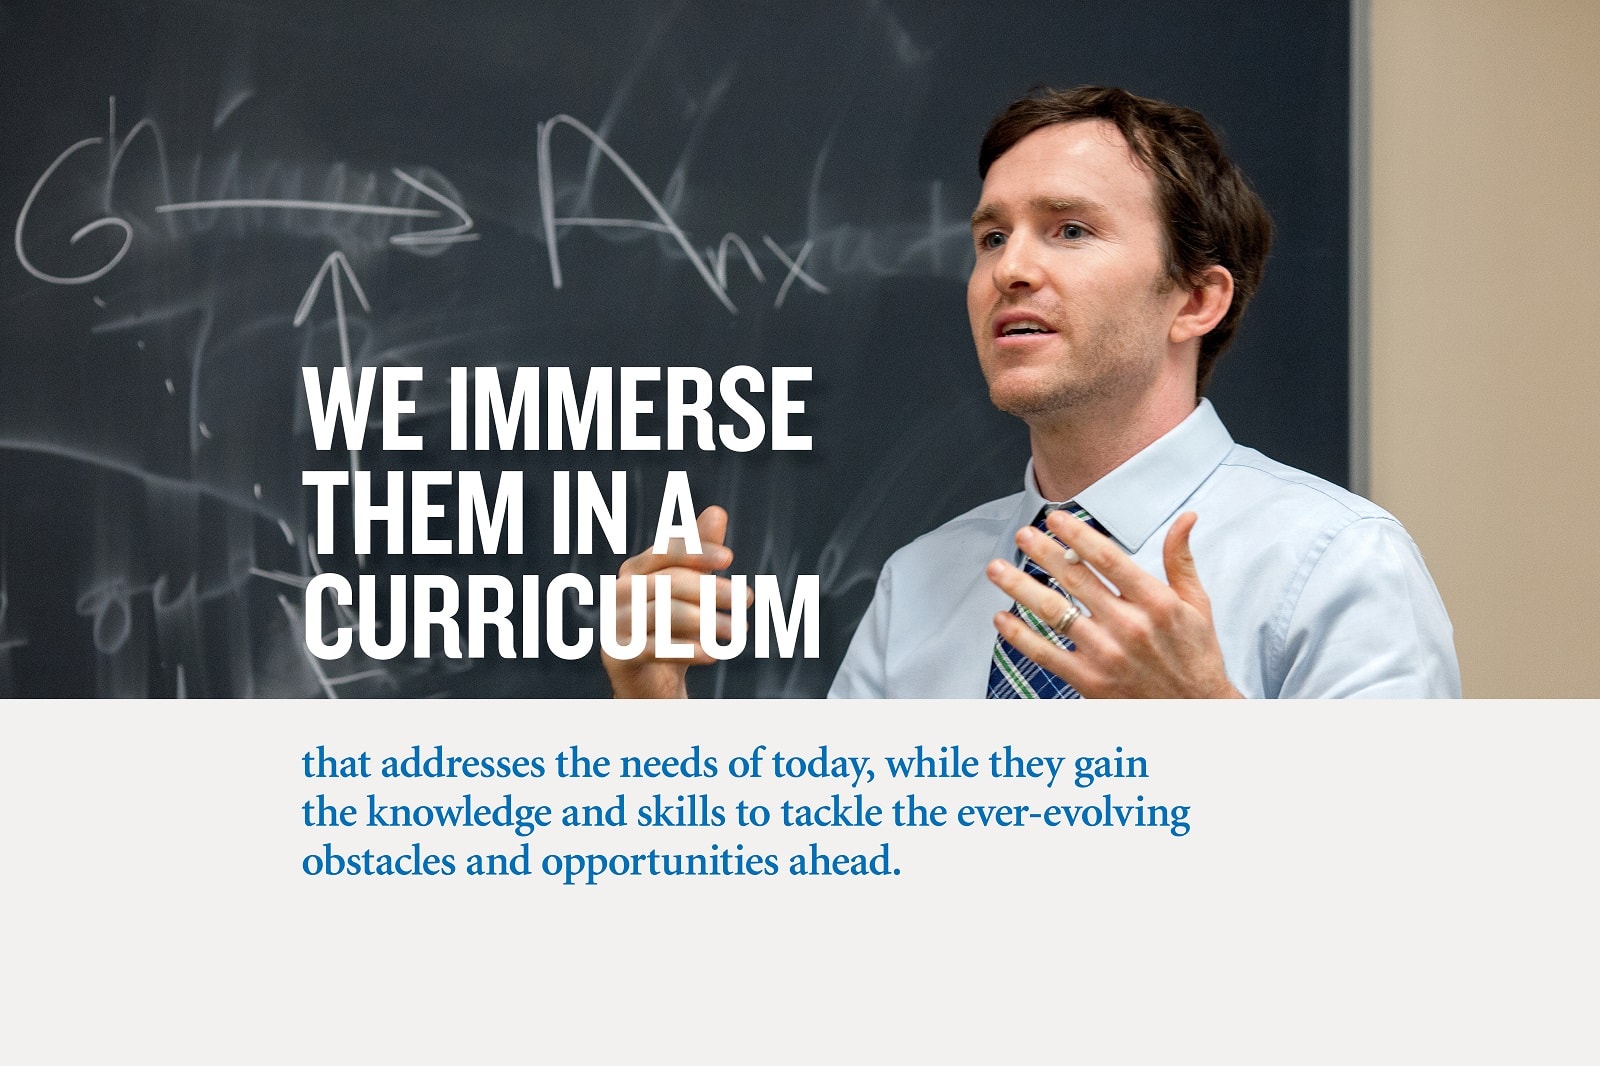 We immerse them in a curriculum.